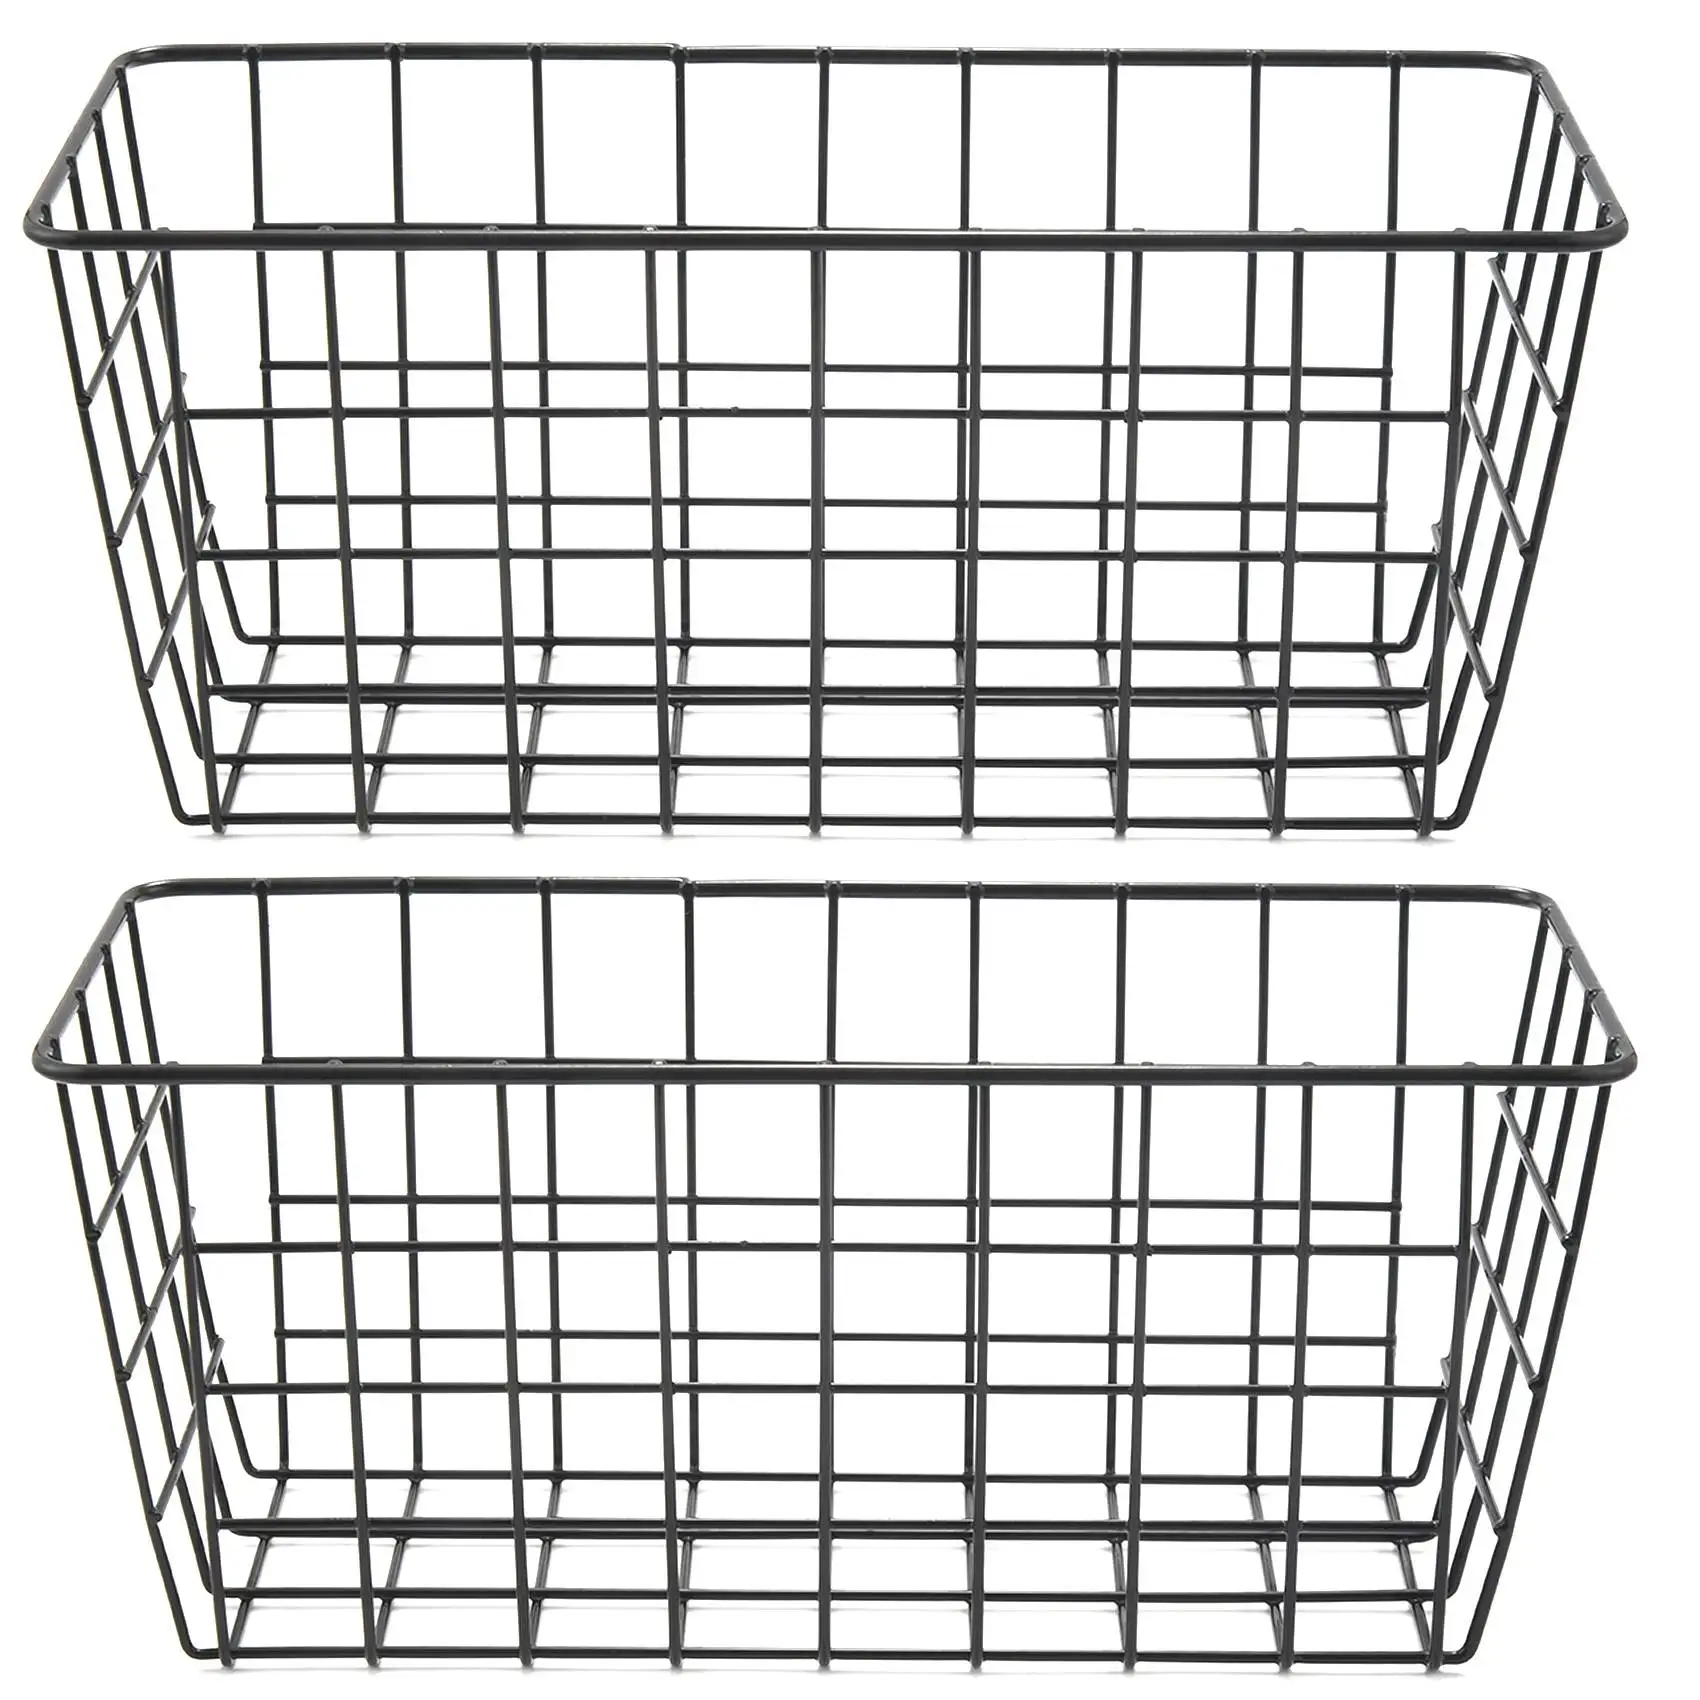 

Adhesive Sturdy Storage Baskets with Kitchen Food Pantry Bathroom Shelf Storage No Drilling Wall Mounted 2 PACK Black